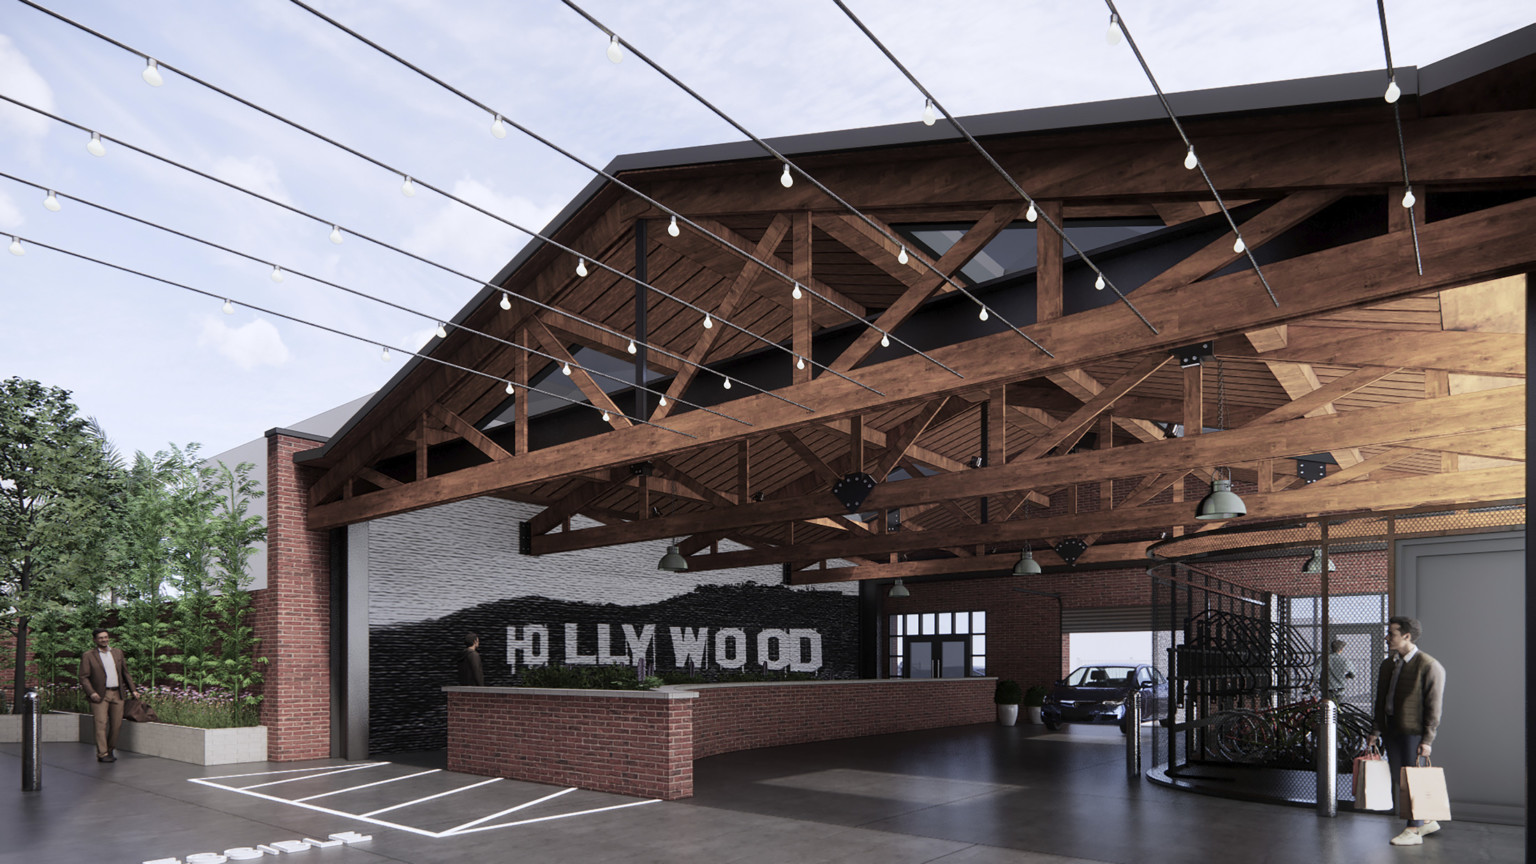 Found Residence at 6422 Selma in Hollywood Los Angeles California rendering of covered open space with Hollywood sign mural